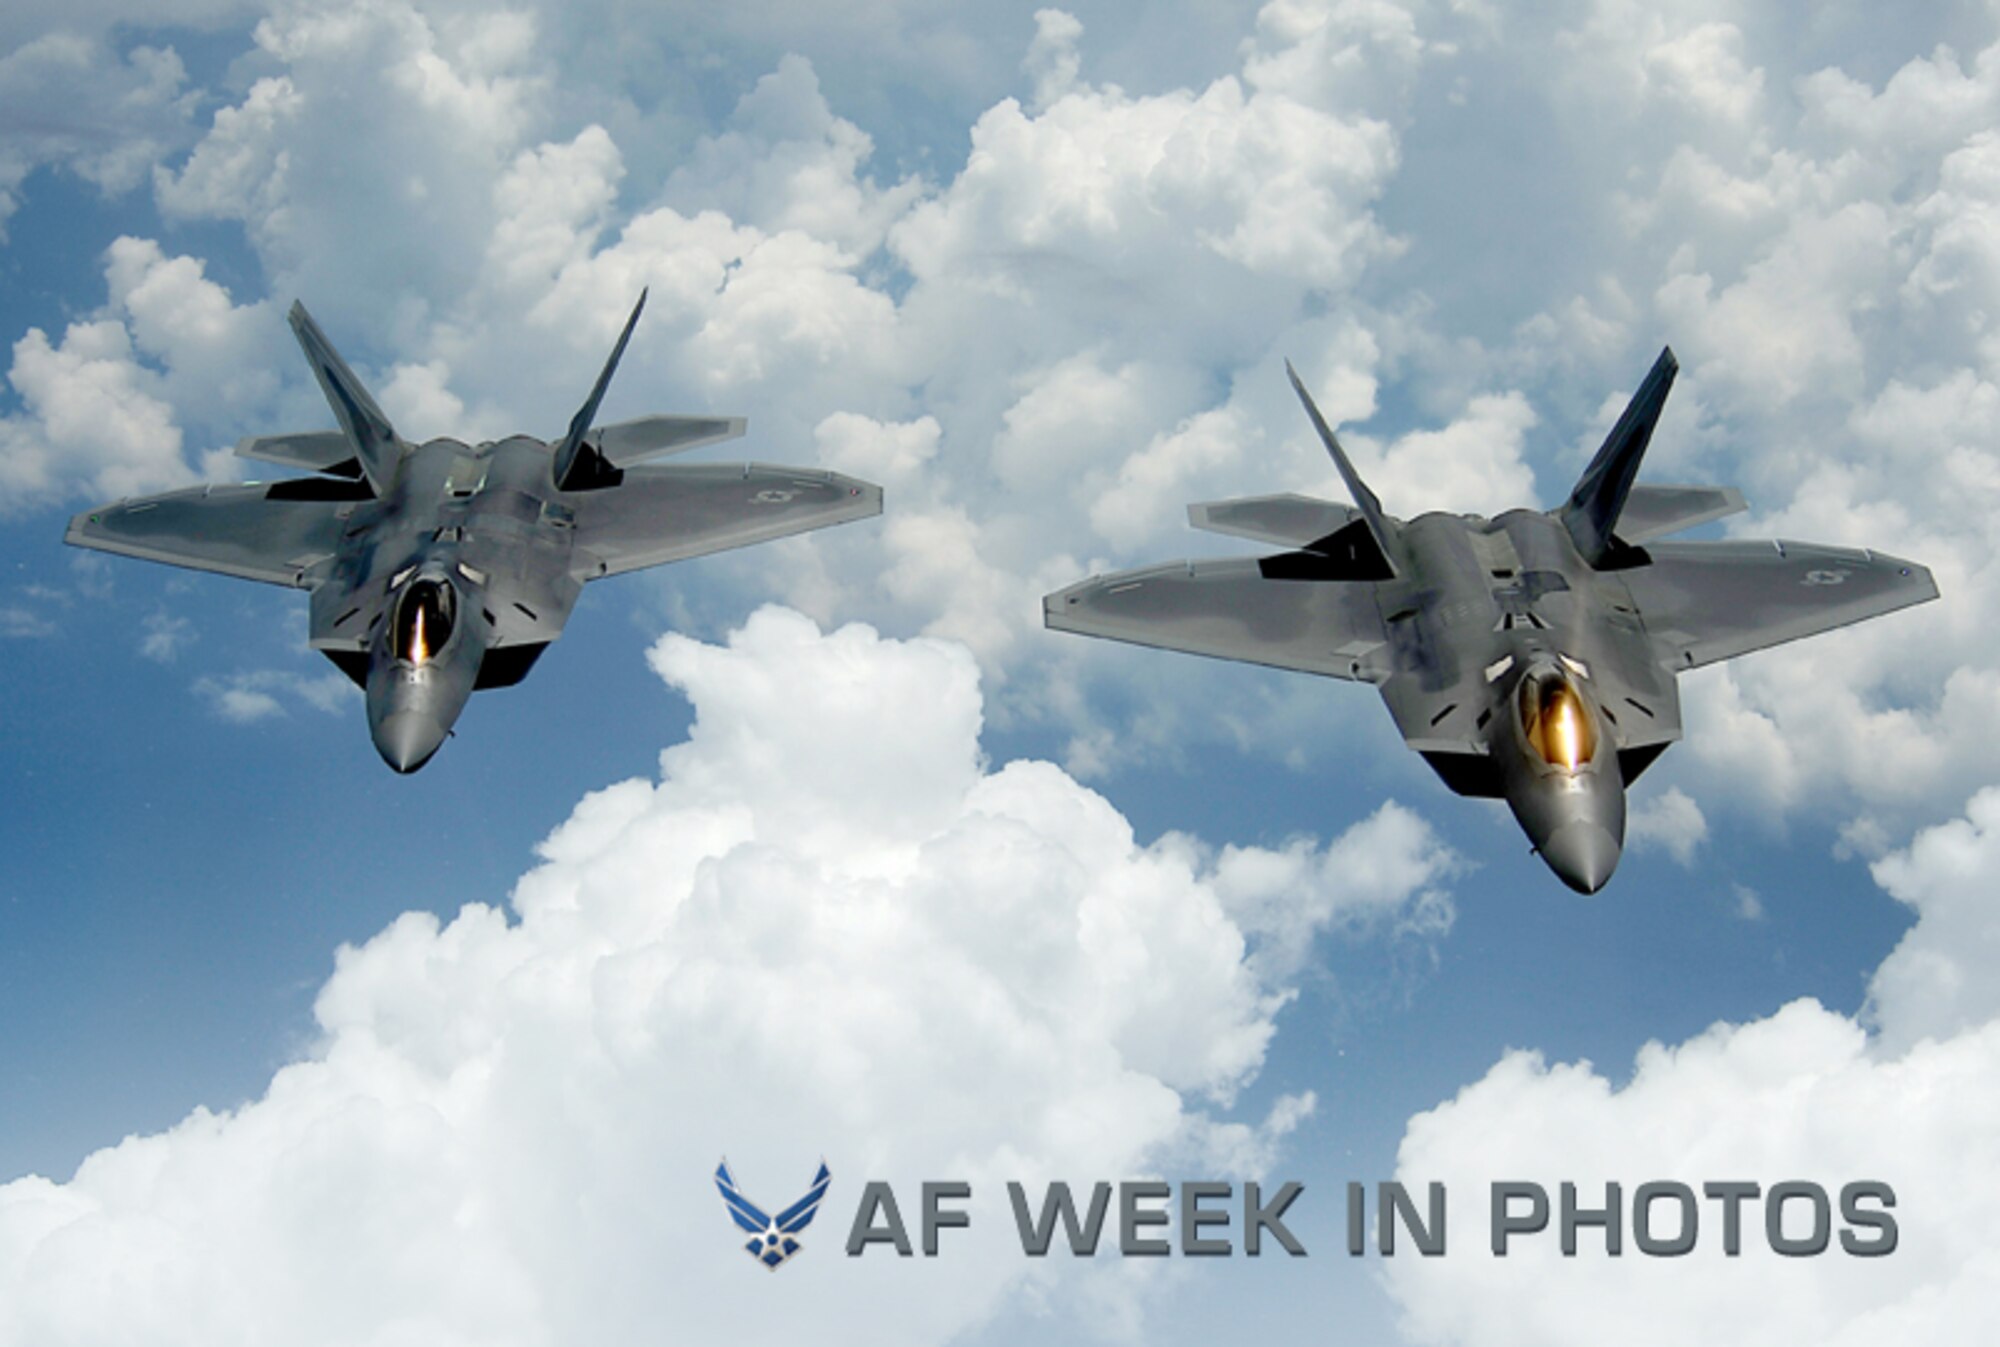 A pair of F-22 Raptors pulls away and flies behind a KC-135 Stratotanker after receiving fuel off of the East Coast on July 10, 2012. The 1st Fighter Wing at Joint Base Langley-Eustis, Va., received their first two Raptors in January 2005 and the wing’s 27th Fighter Squadron was designated as fully operational in December 2005. The Raptors belong to the 27th FS and the KC-135 belongs to the 756th Air Refueling Squadron at Joint Base Andrews Naval Air Facility, Md. (U.S. Air Force photo/Master Sgt. Jeremy Lock)